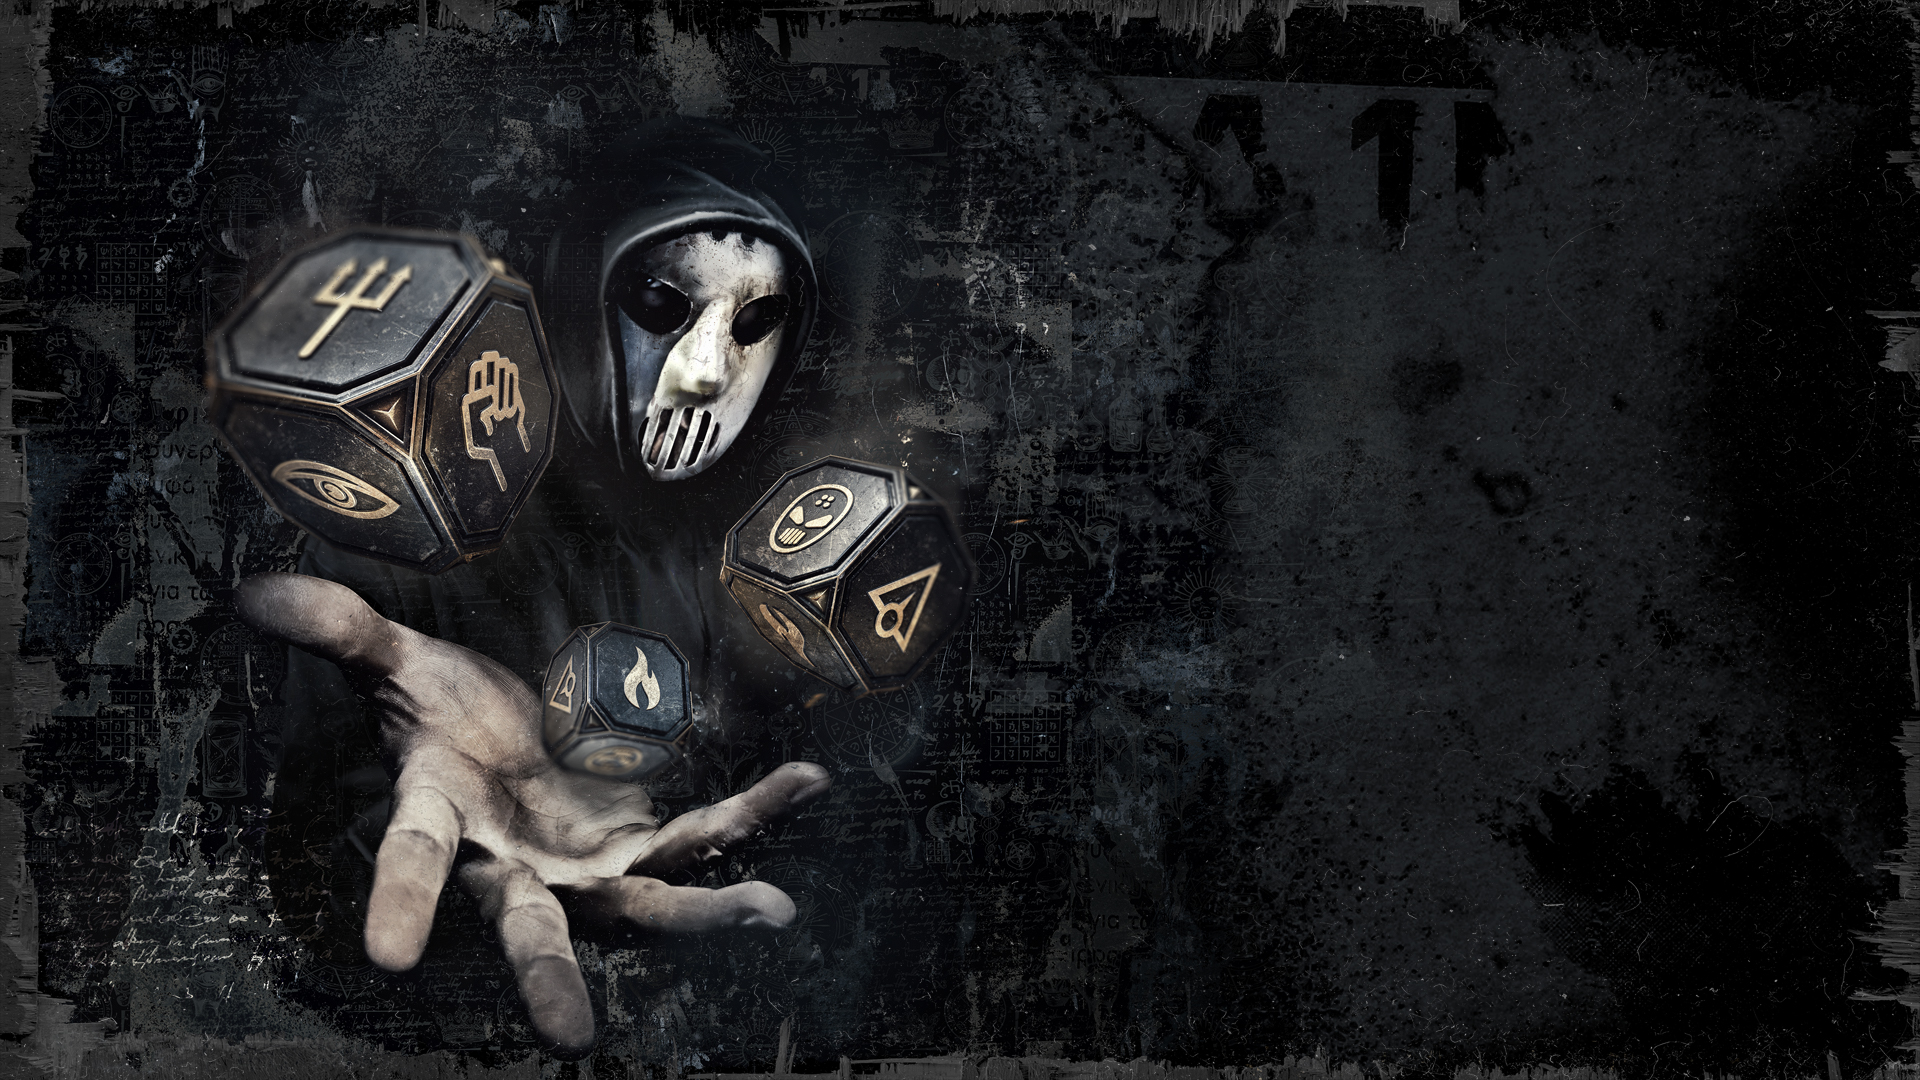 angerfist wallpaper,darkness,personal protective equipment,art,illustration,games